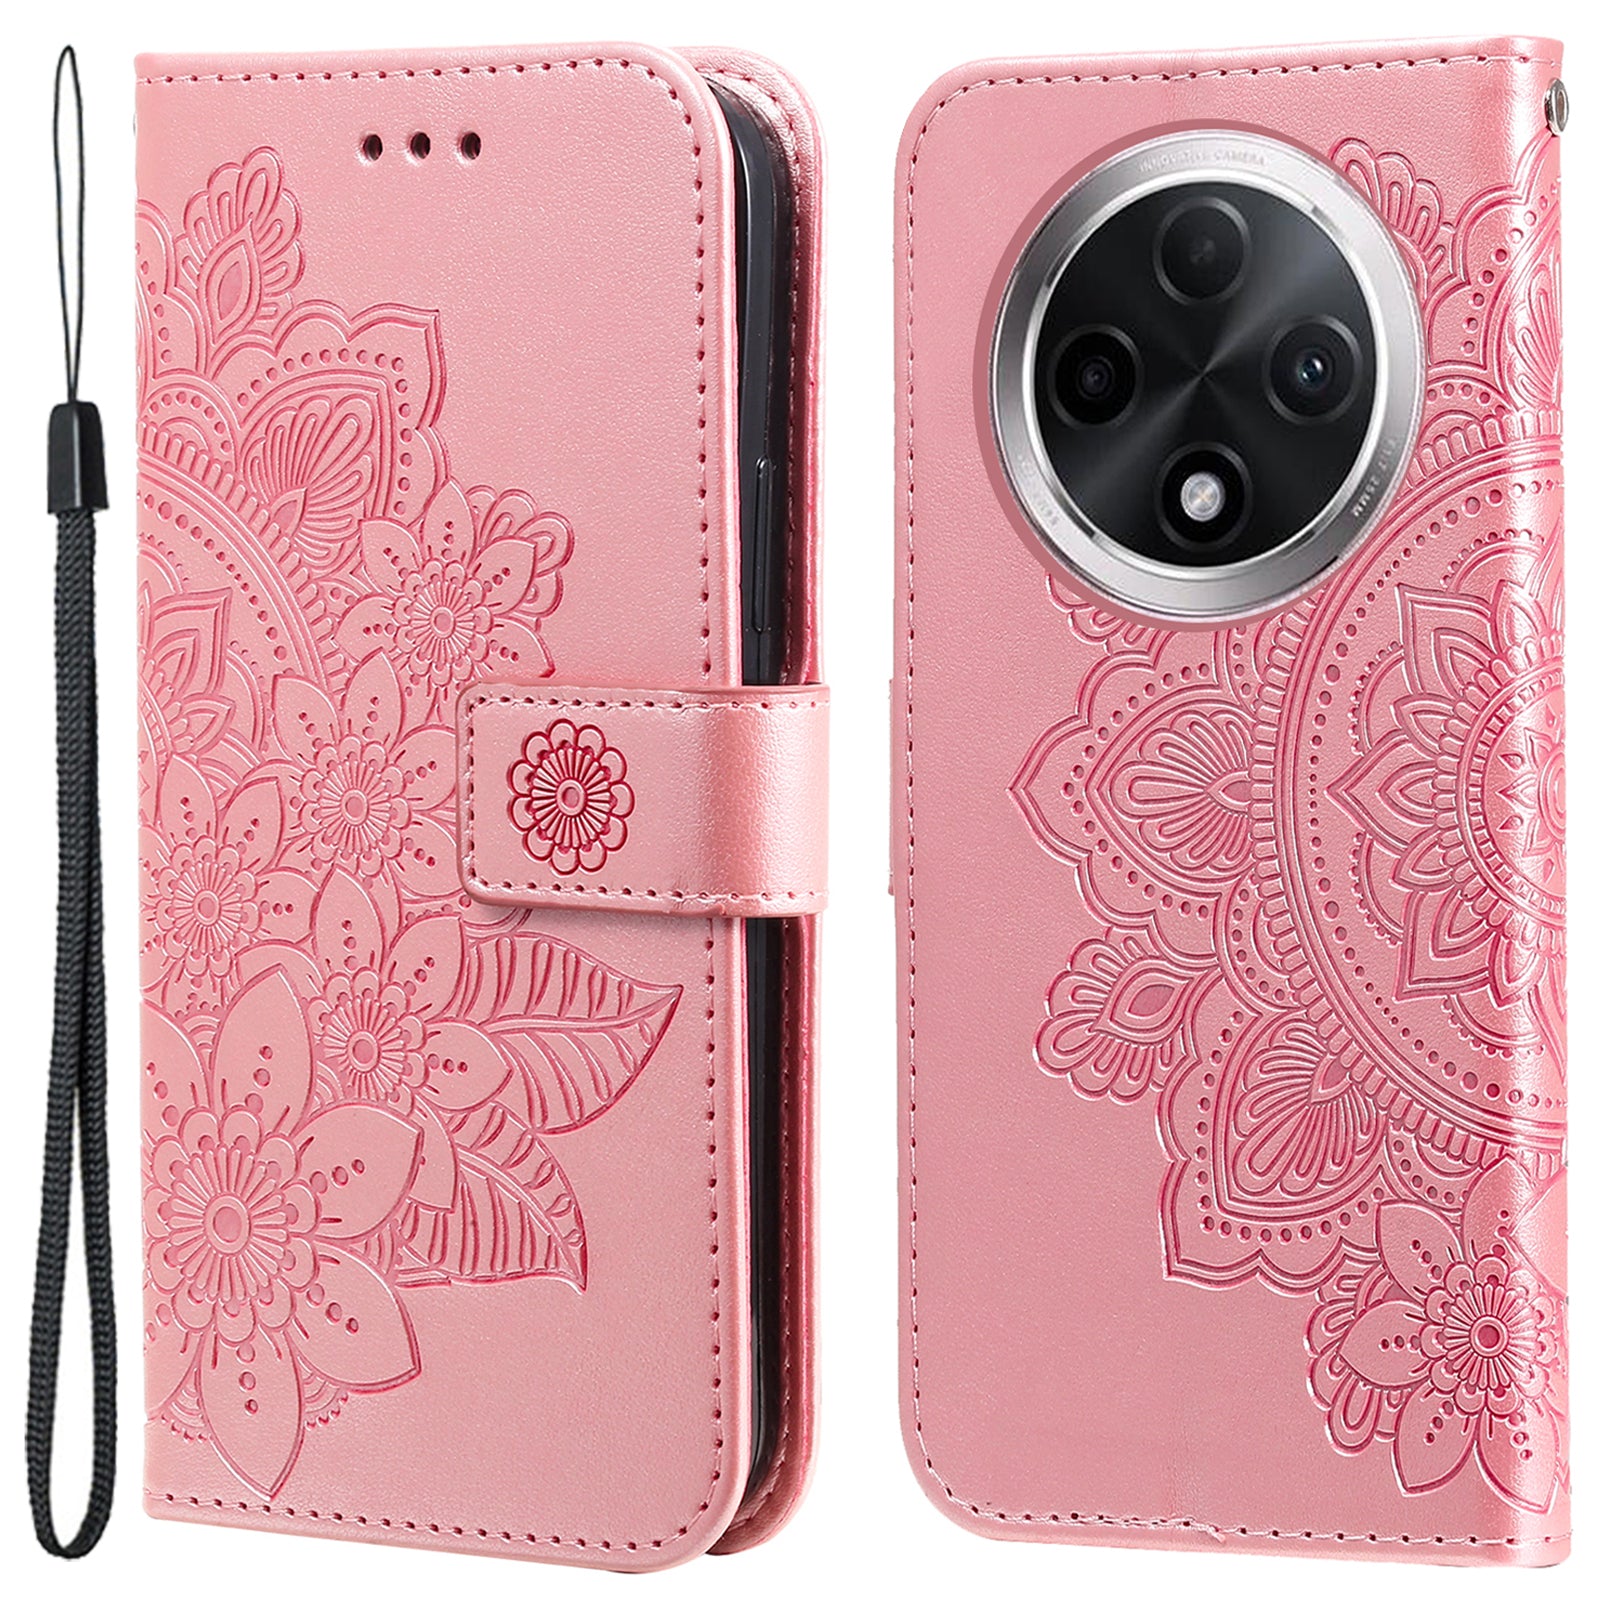 For Oppo A3 Pro 5G Wallet Case Flower Pattern PU Leather Phone Cover with Magnetic Clasp - Pink